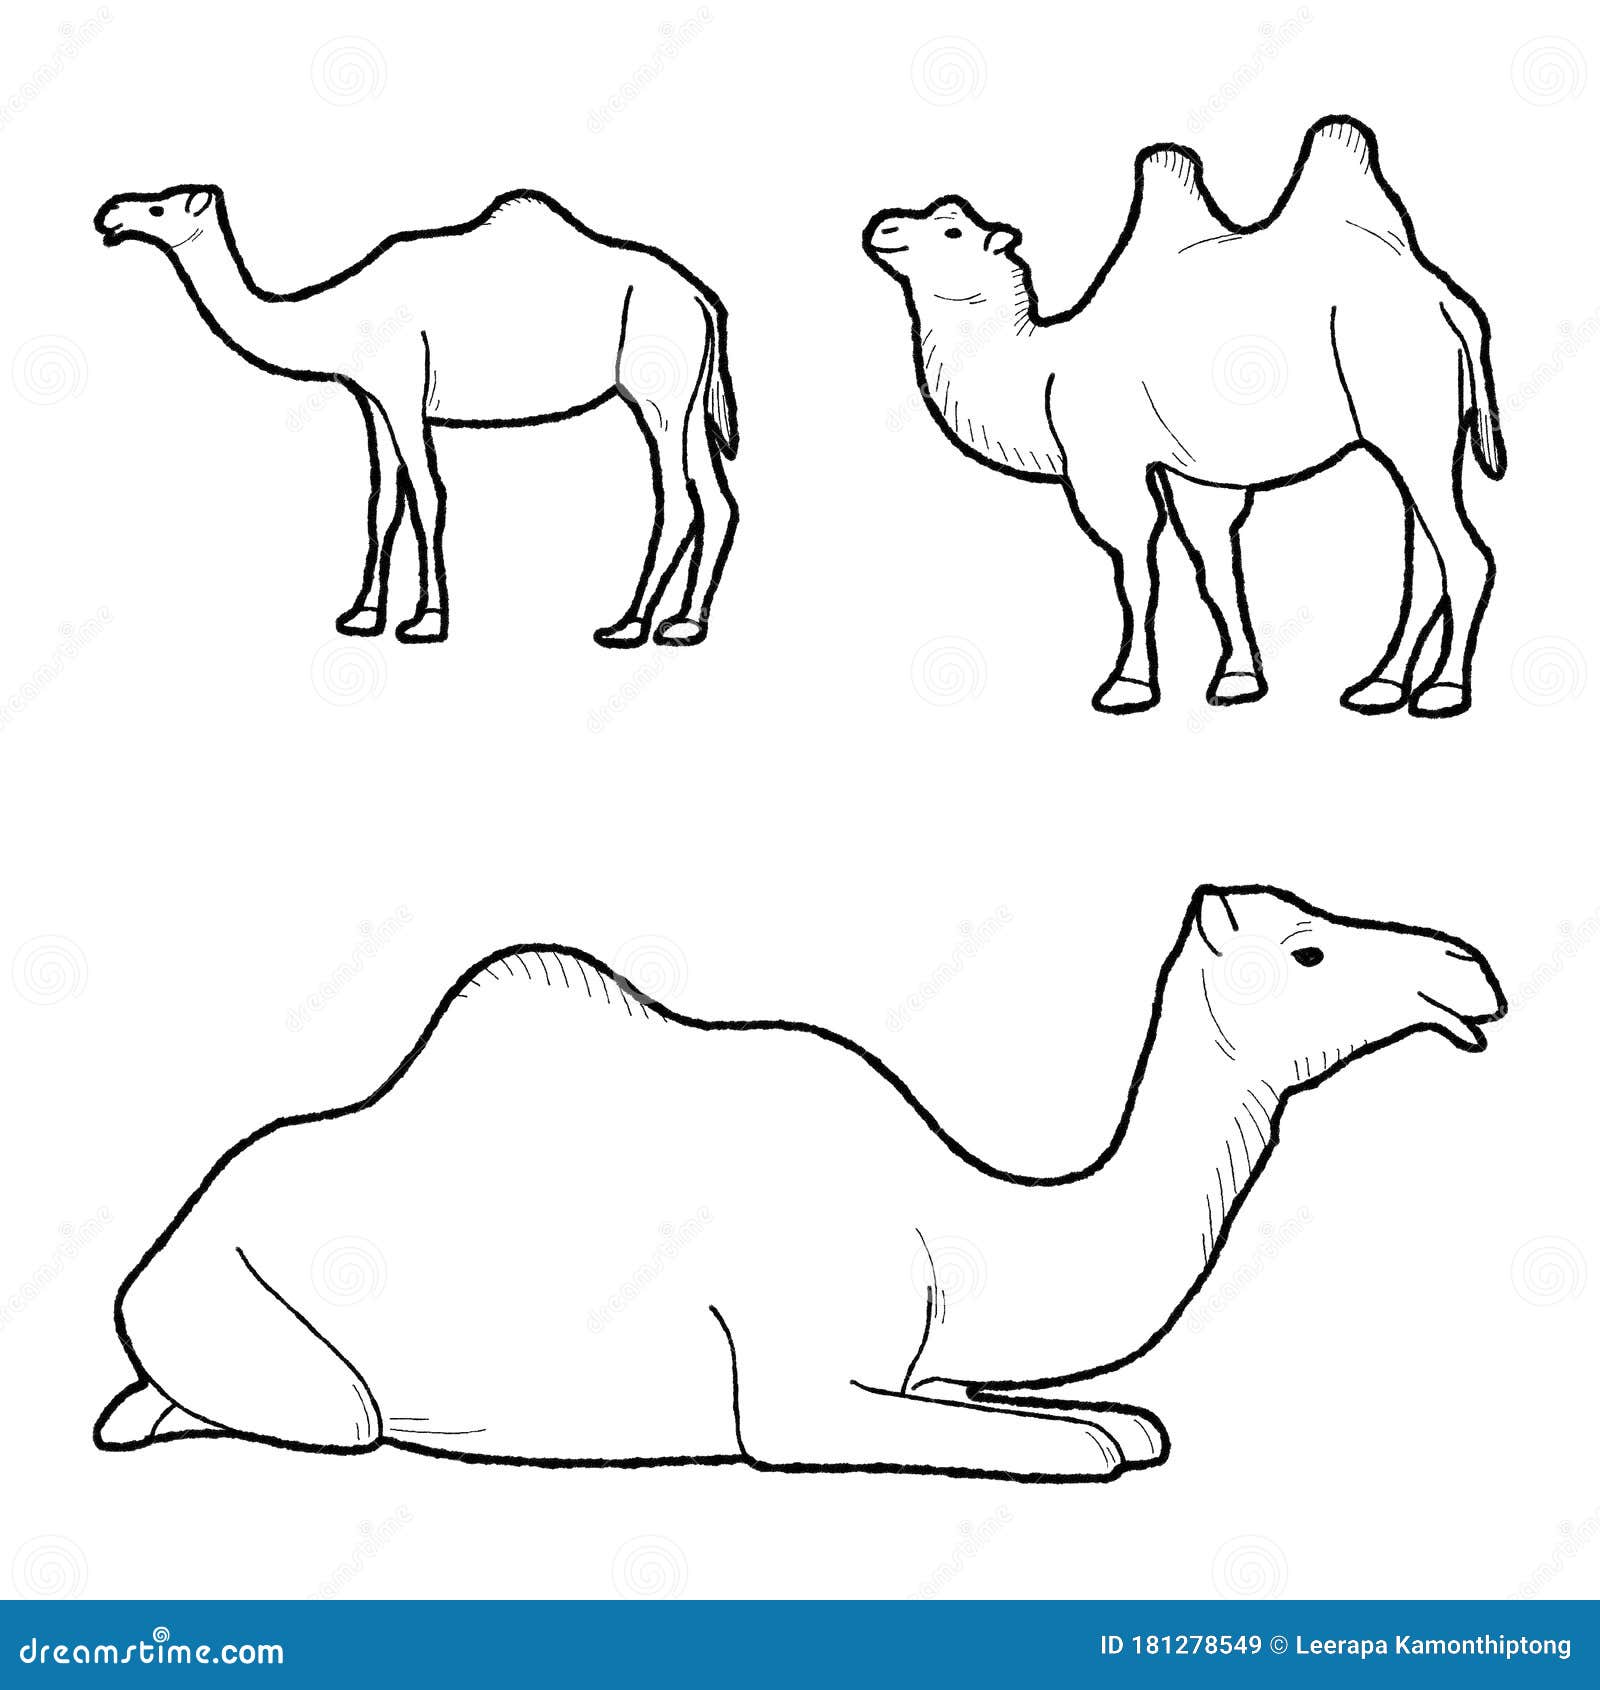 How to draw a camel  Animal drawing for beginners  YouTube